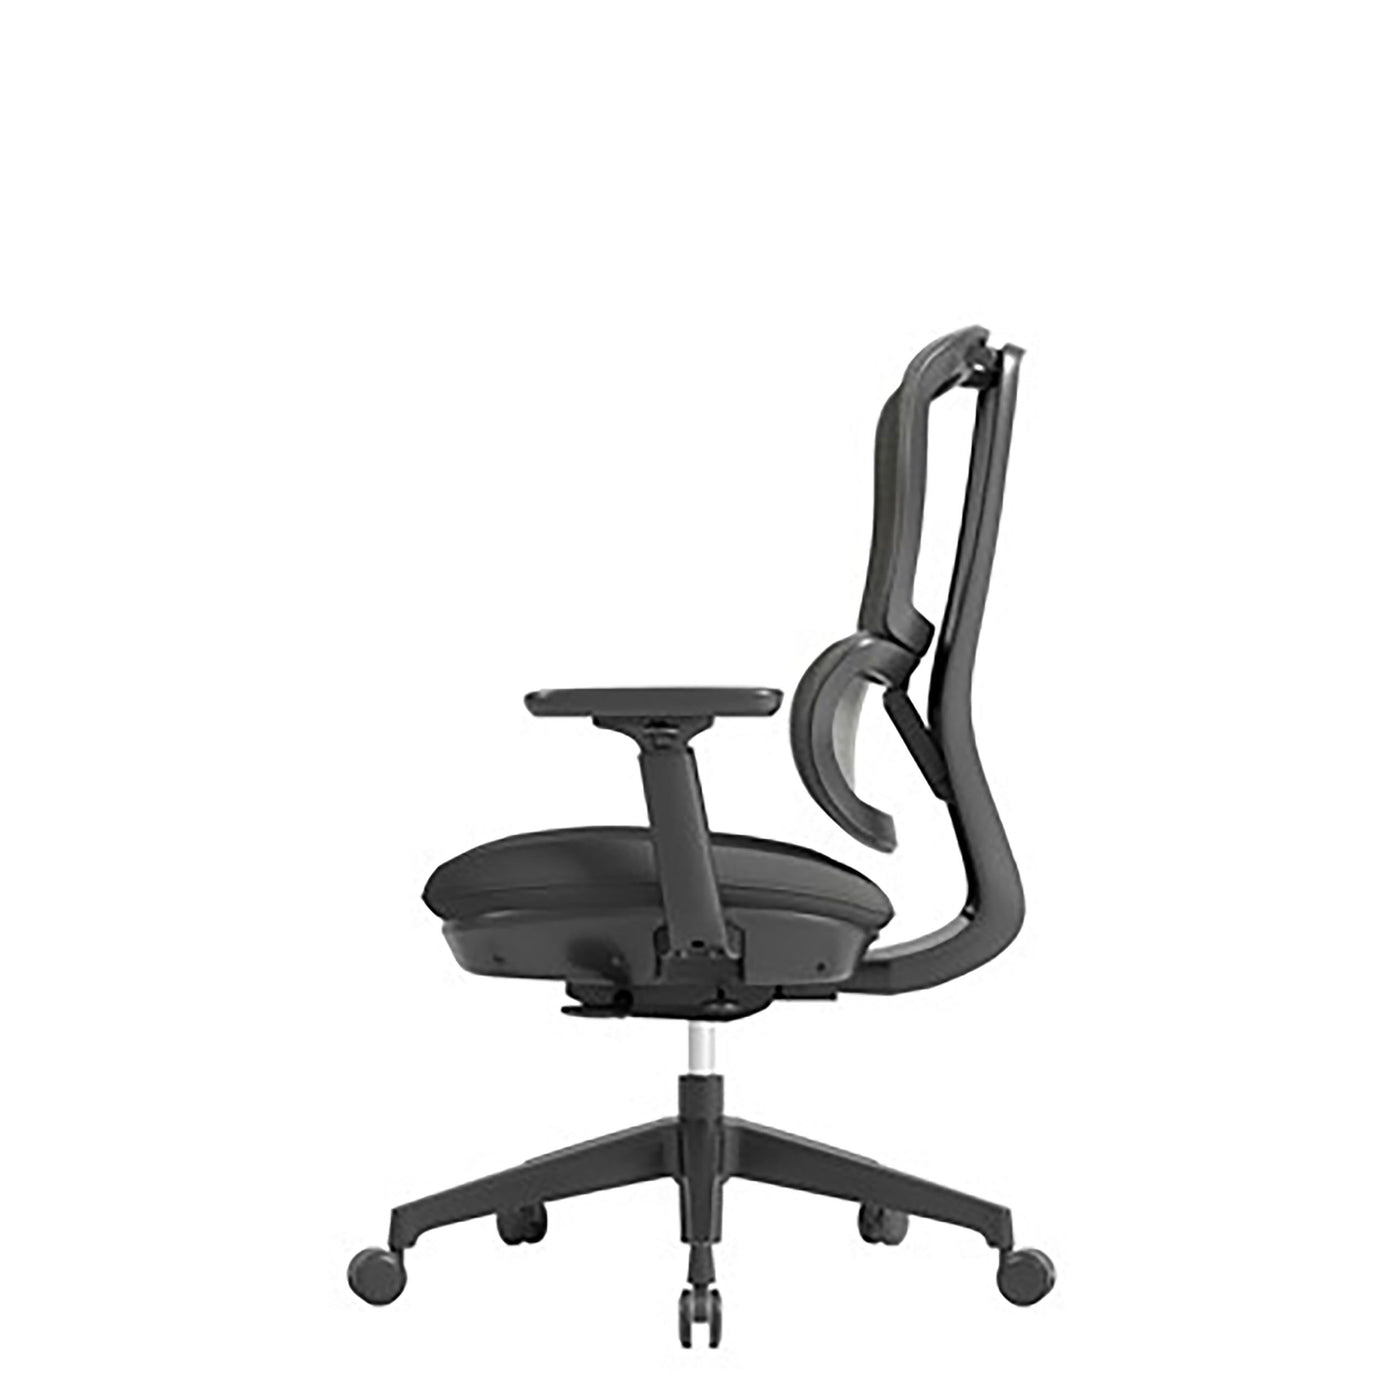 Shelby ergonomic home office chair by Home by Innov8